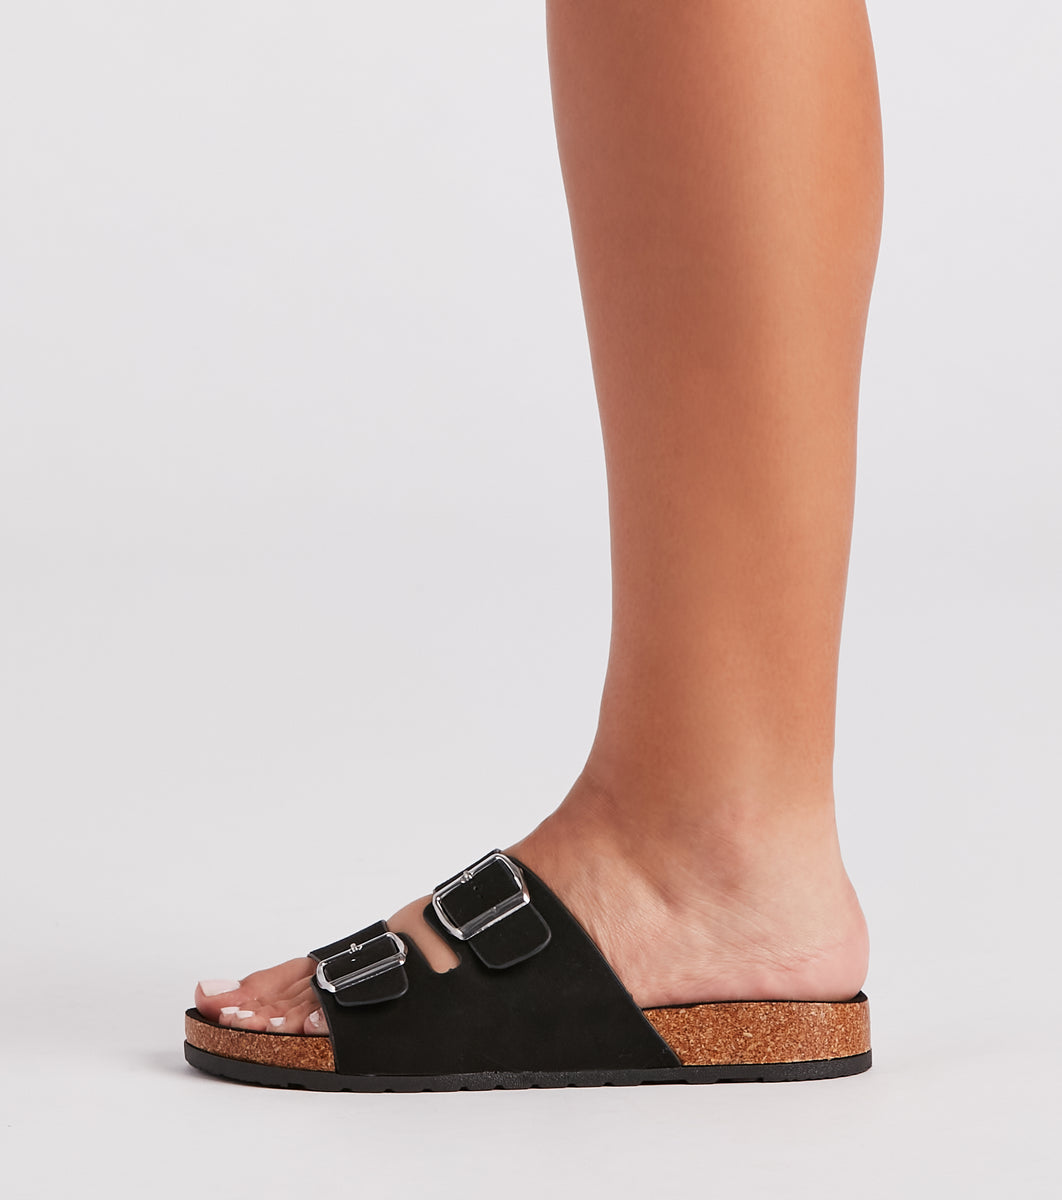 Trendy Must-Have Buckle-Strap Sandals